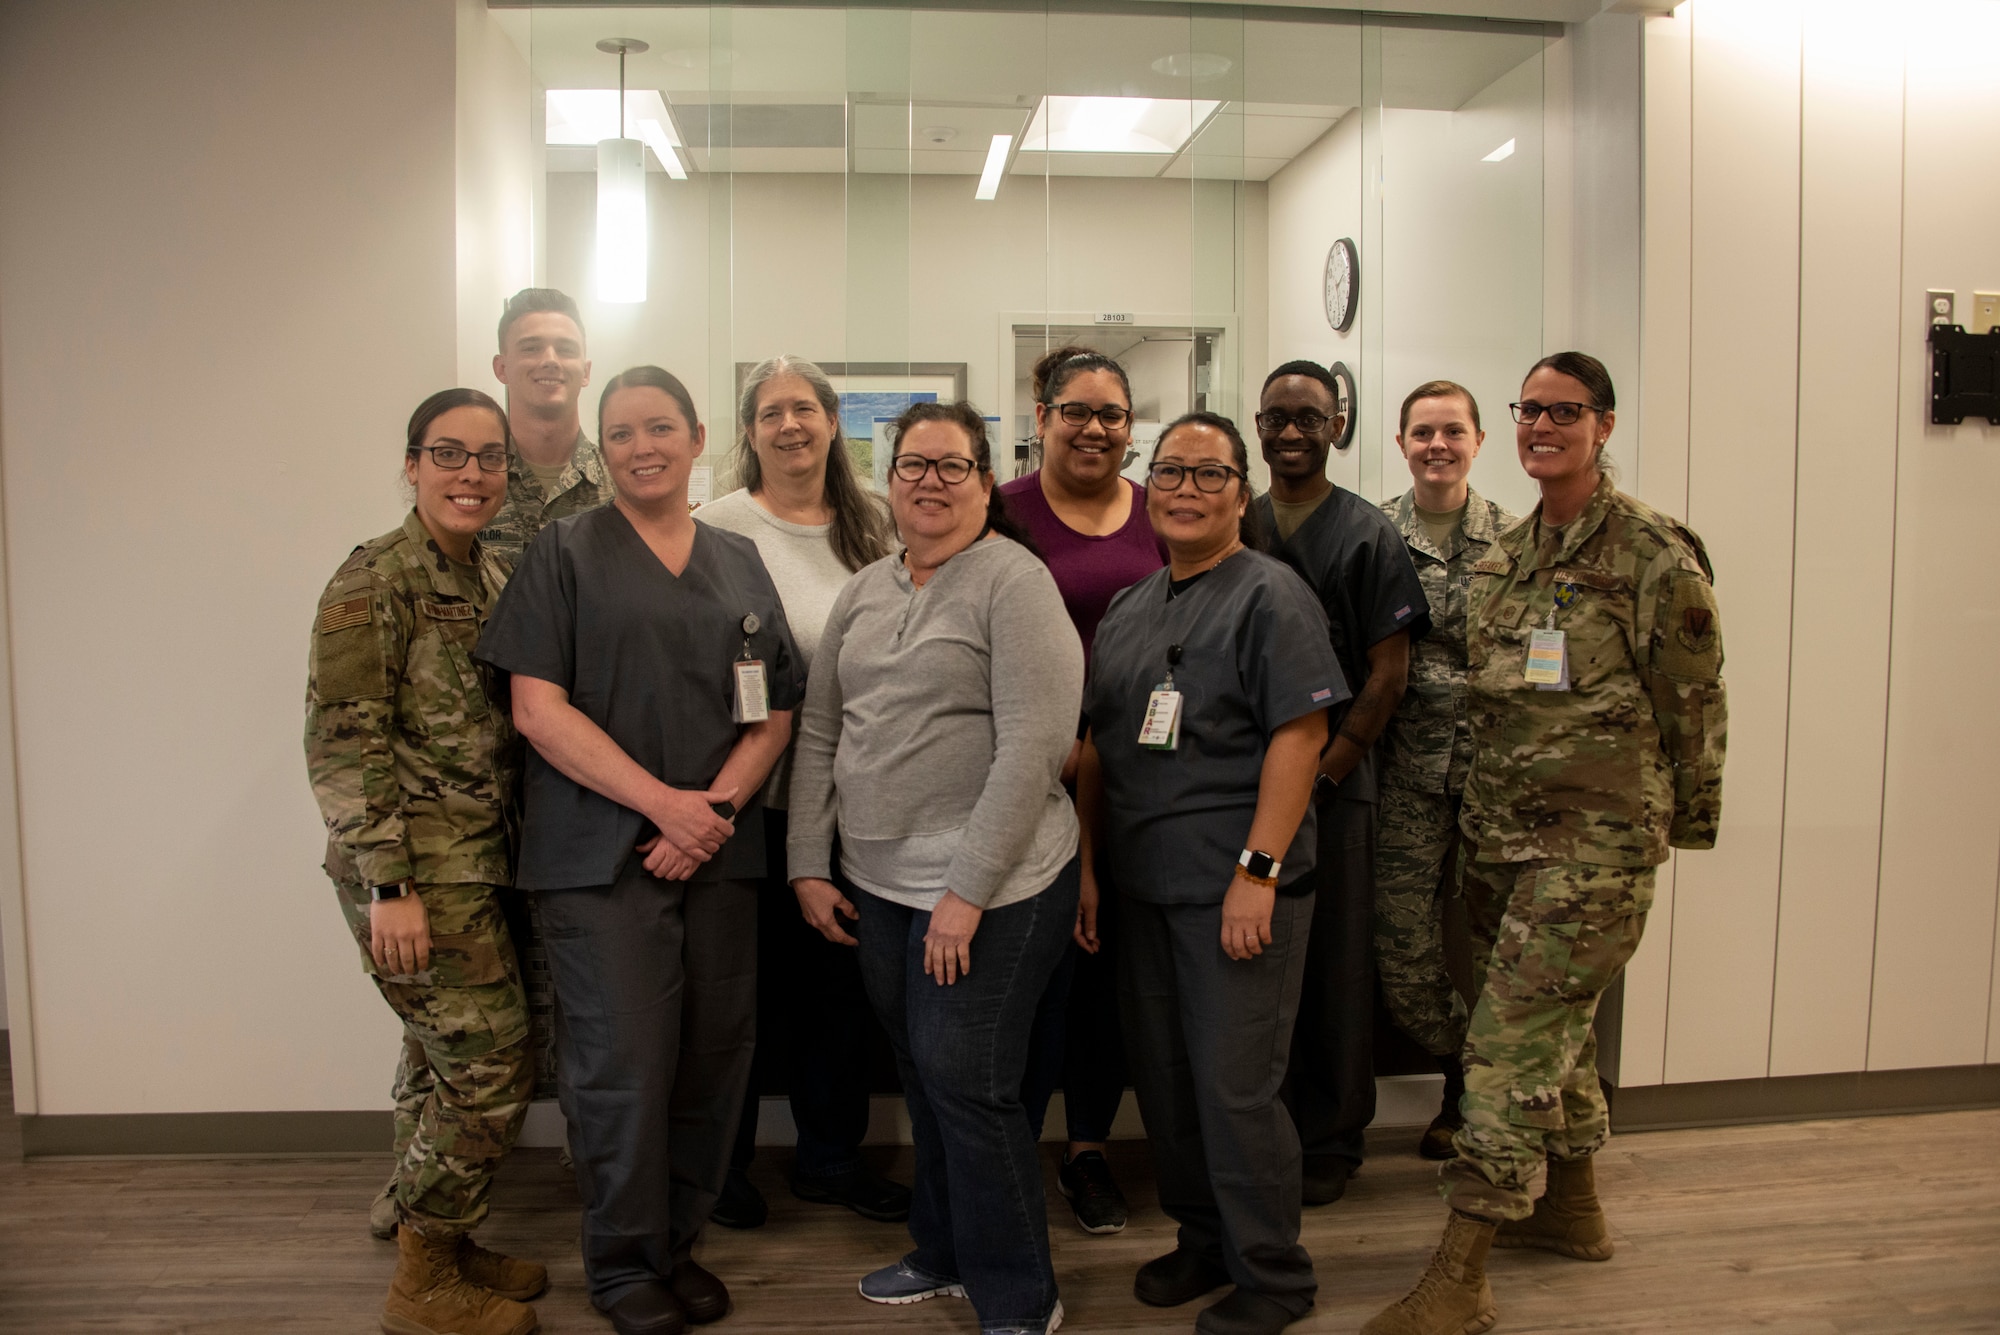 Dental technicians with the 325th Operational Medical Readiness Squadron pose for a group photo at Tyndall Air Force Base, Mar. 4, 2020. Dental Assistants Recognition Week is held the first week in March to recognize the critical part dental assistants play in patient care. (U.S. Air Force photo by 2nd Lt. Kayla Fitzgerald)